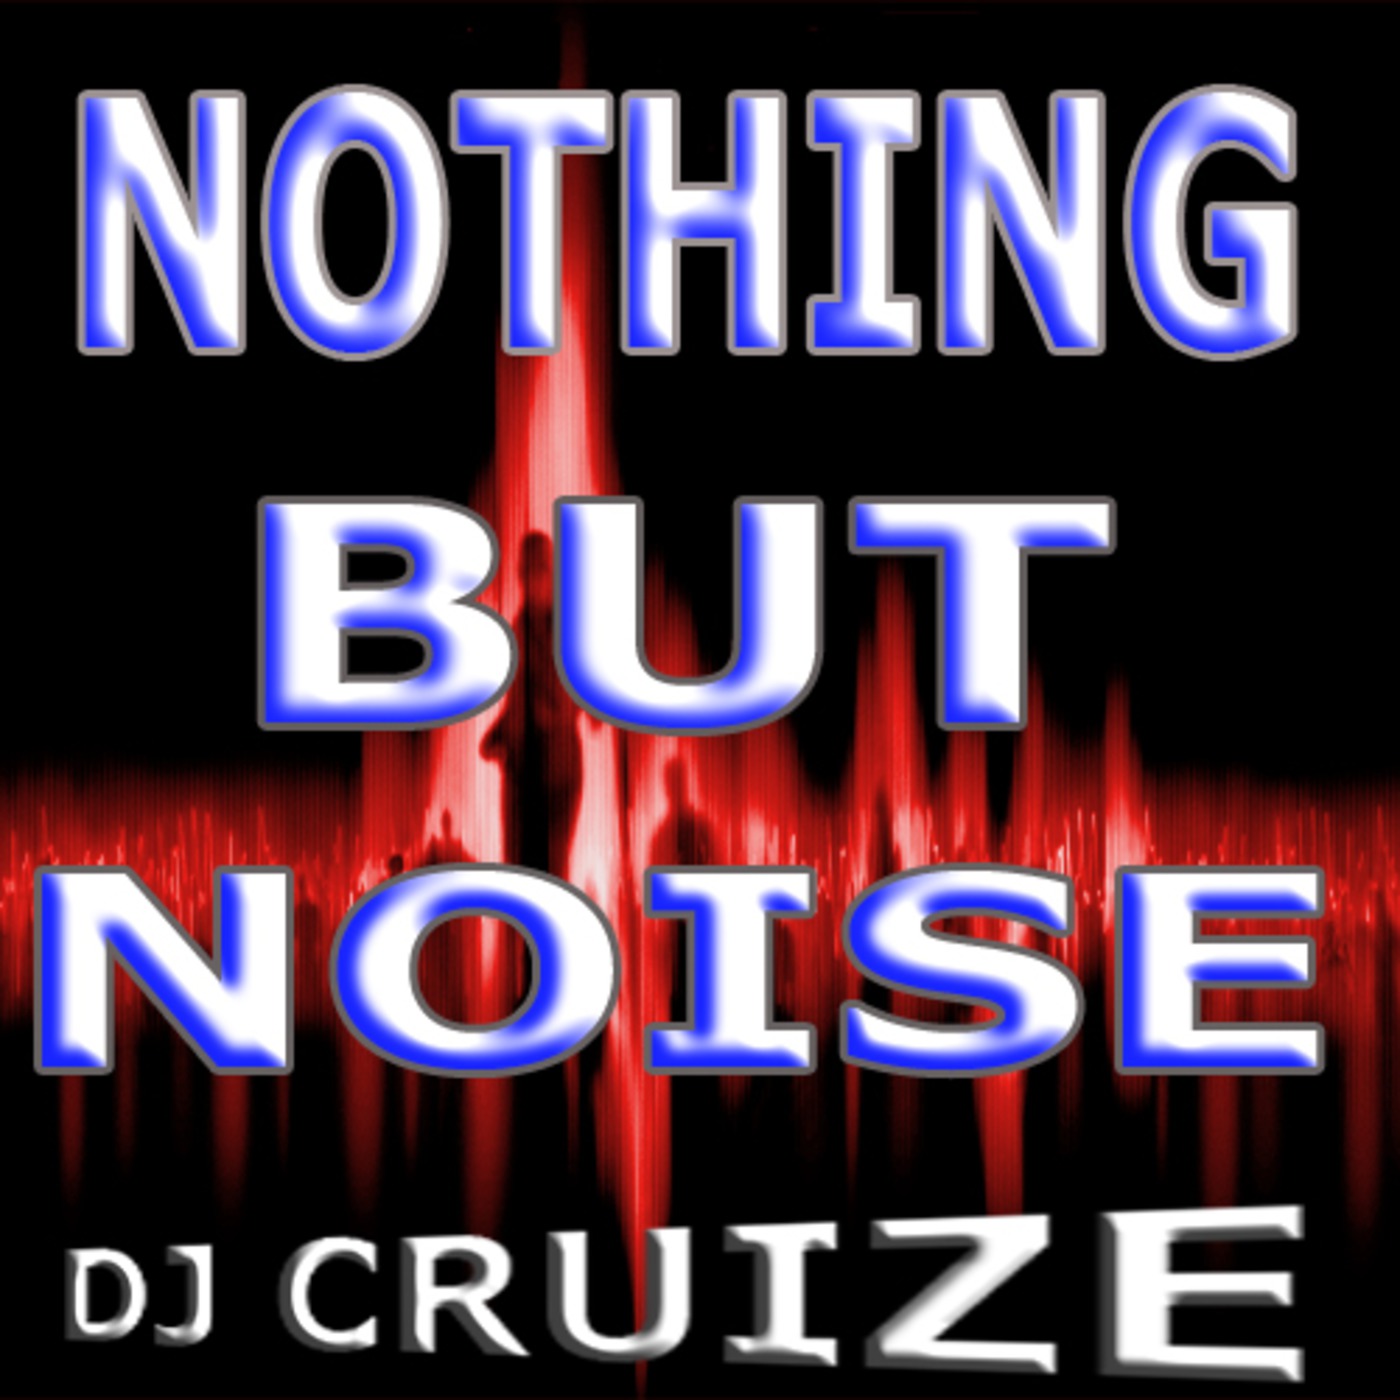 Nothing But Noise "House Trax"